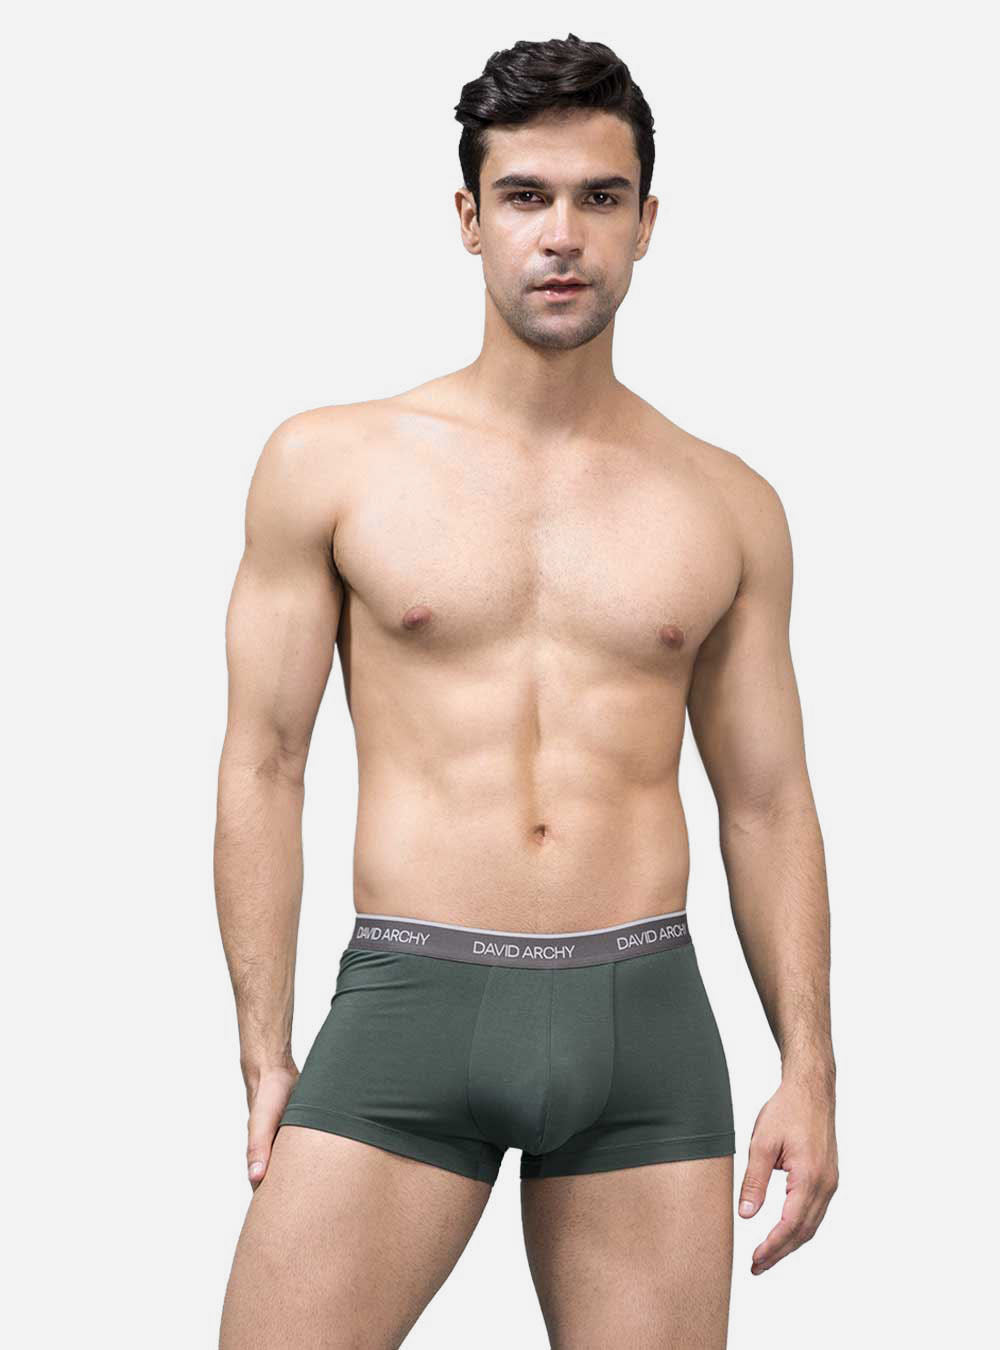 4 Packs Bamboo Rayon Trunks Dual Pouch Smooth David Archy Ultra Soft Smooth  Breathable Contour Underwear